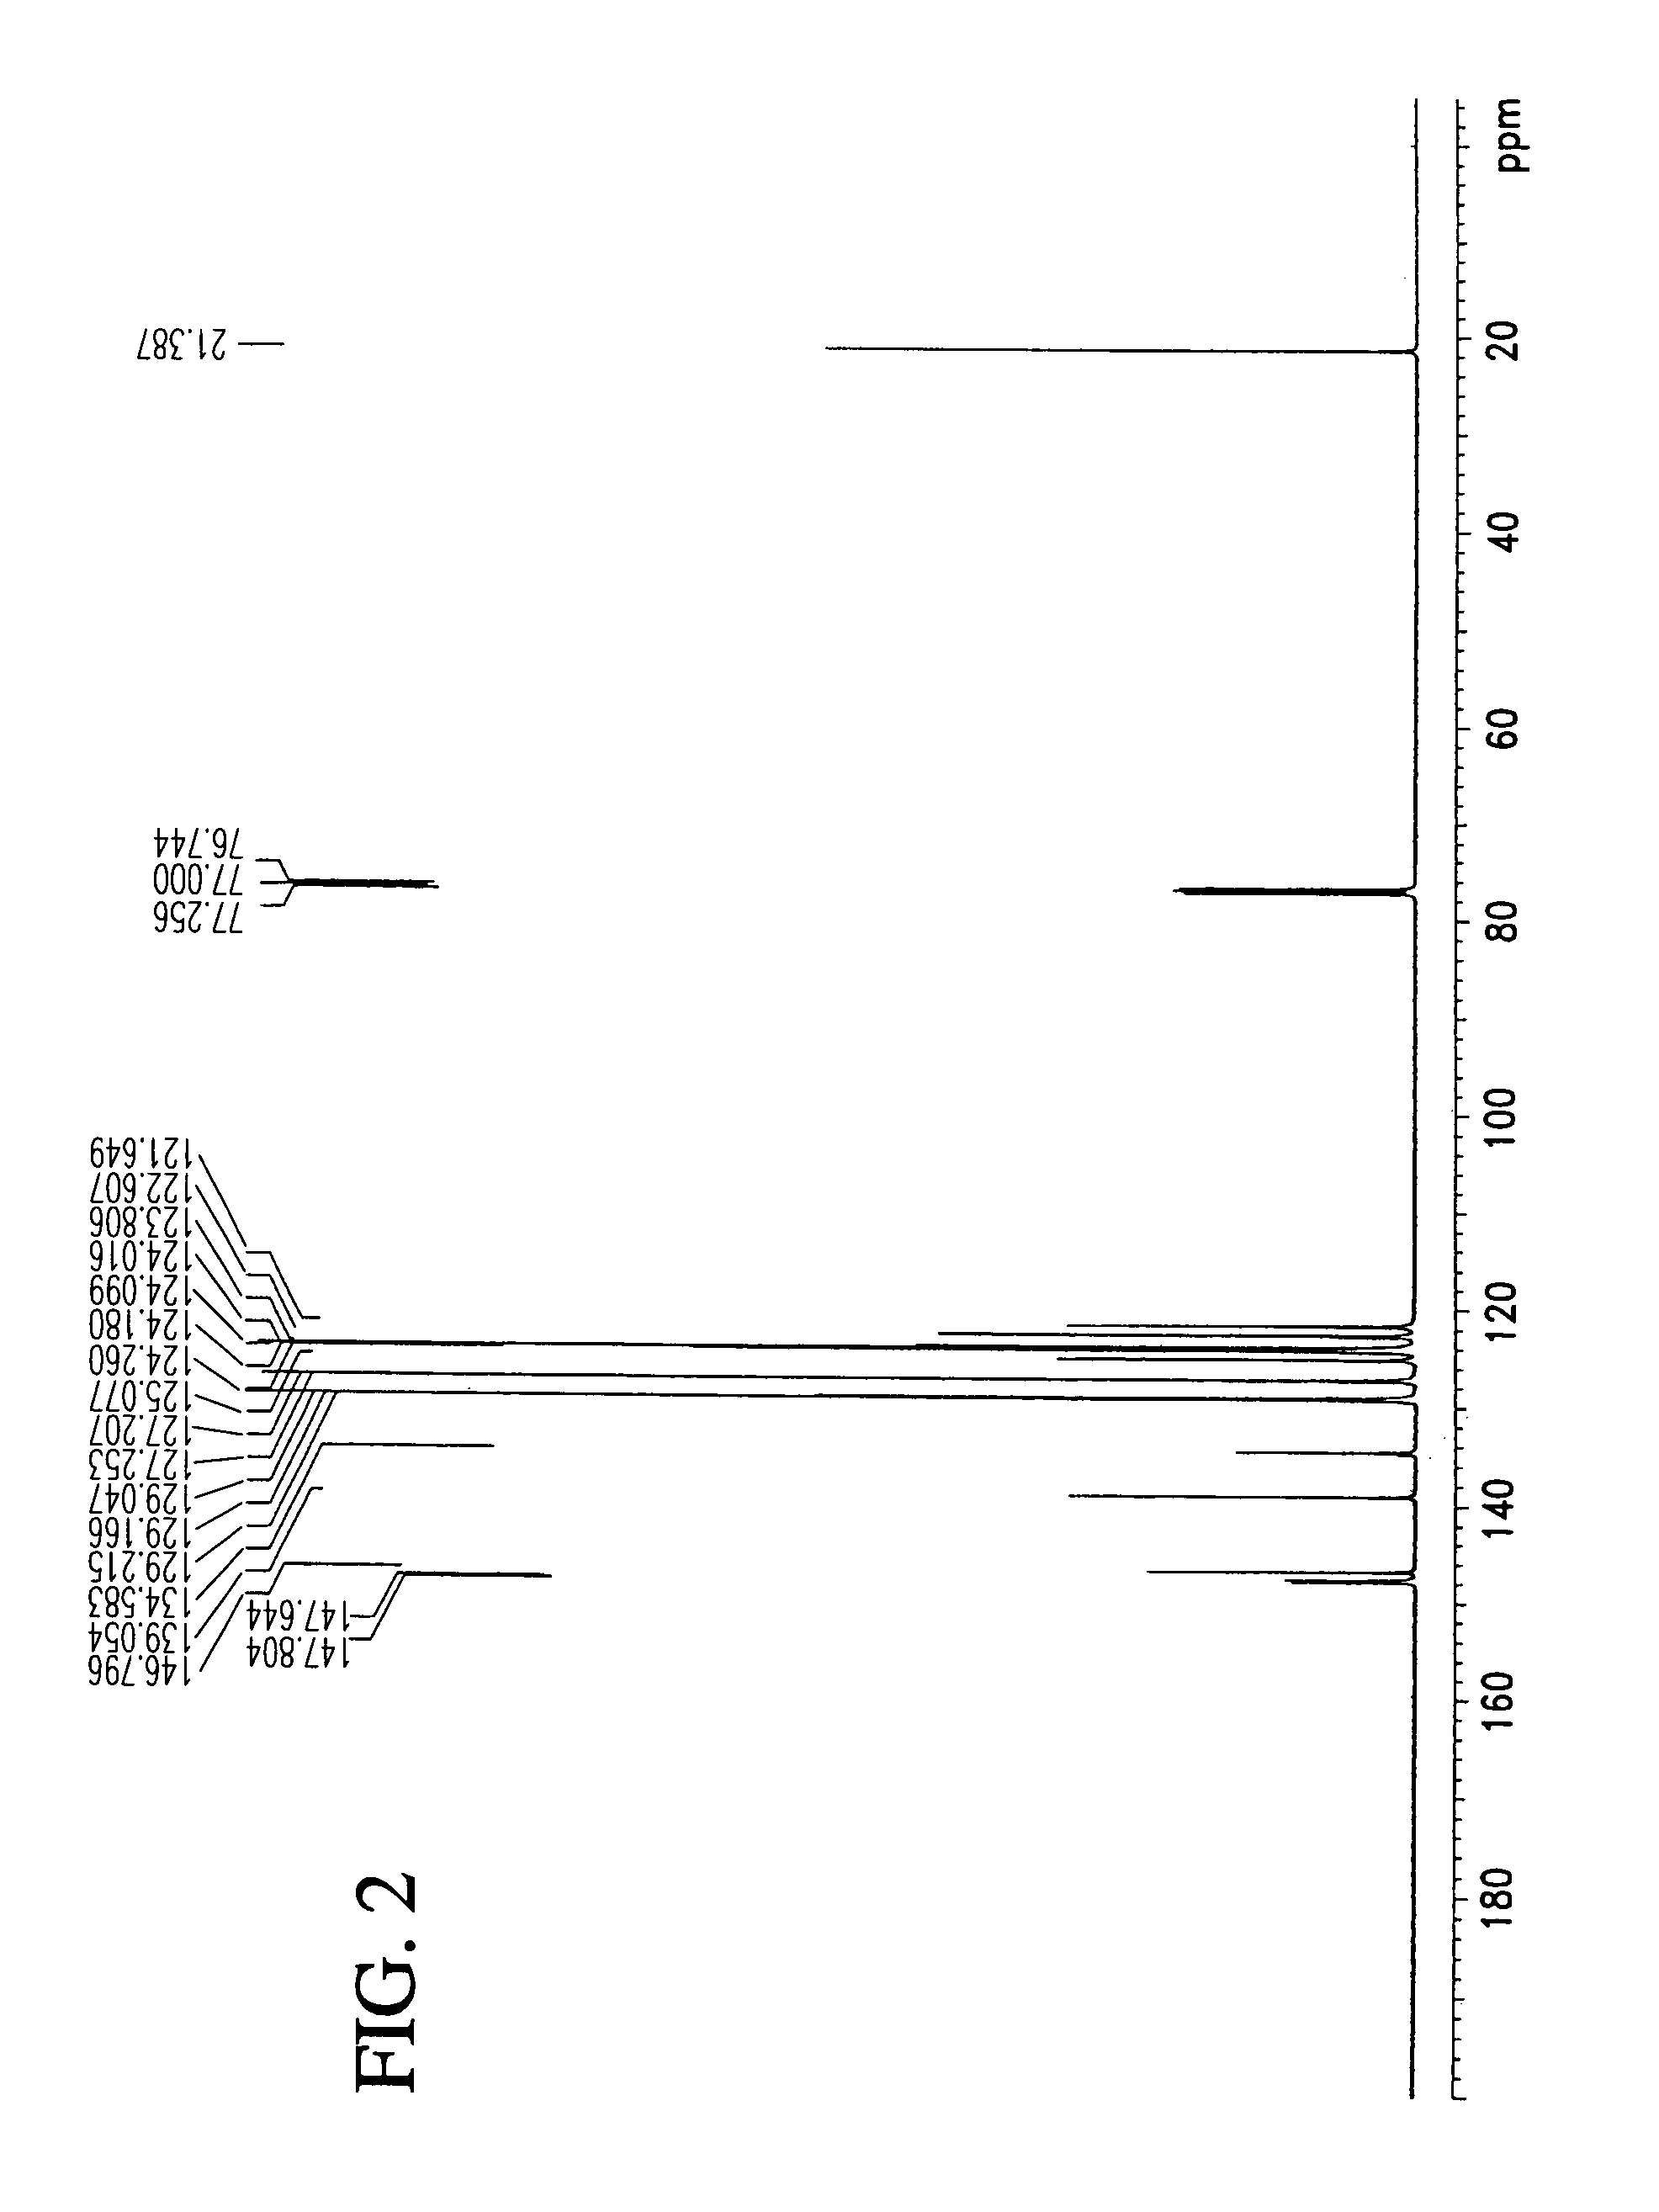 Method for preparing three types of benzidine compounds in a specific ratio